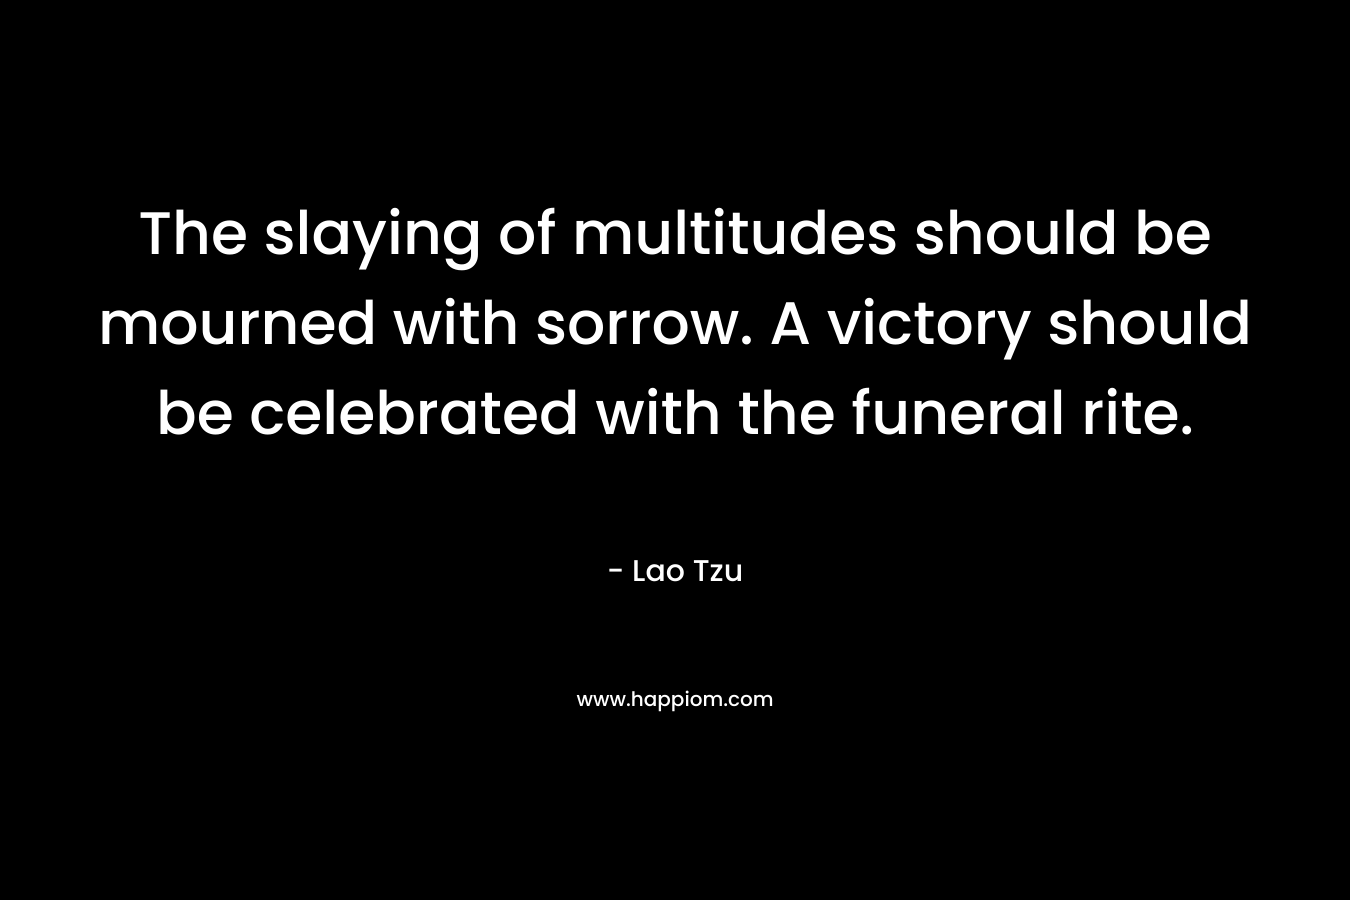 The slaying of multitudes should be mourned with sorrow. A victory should be celebrated with the funeral rite. – Lao Tzu